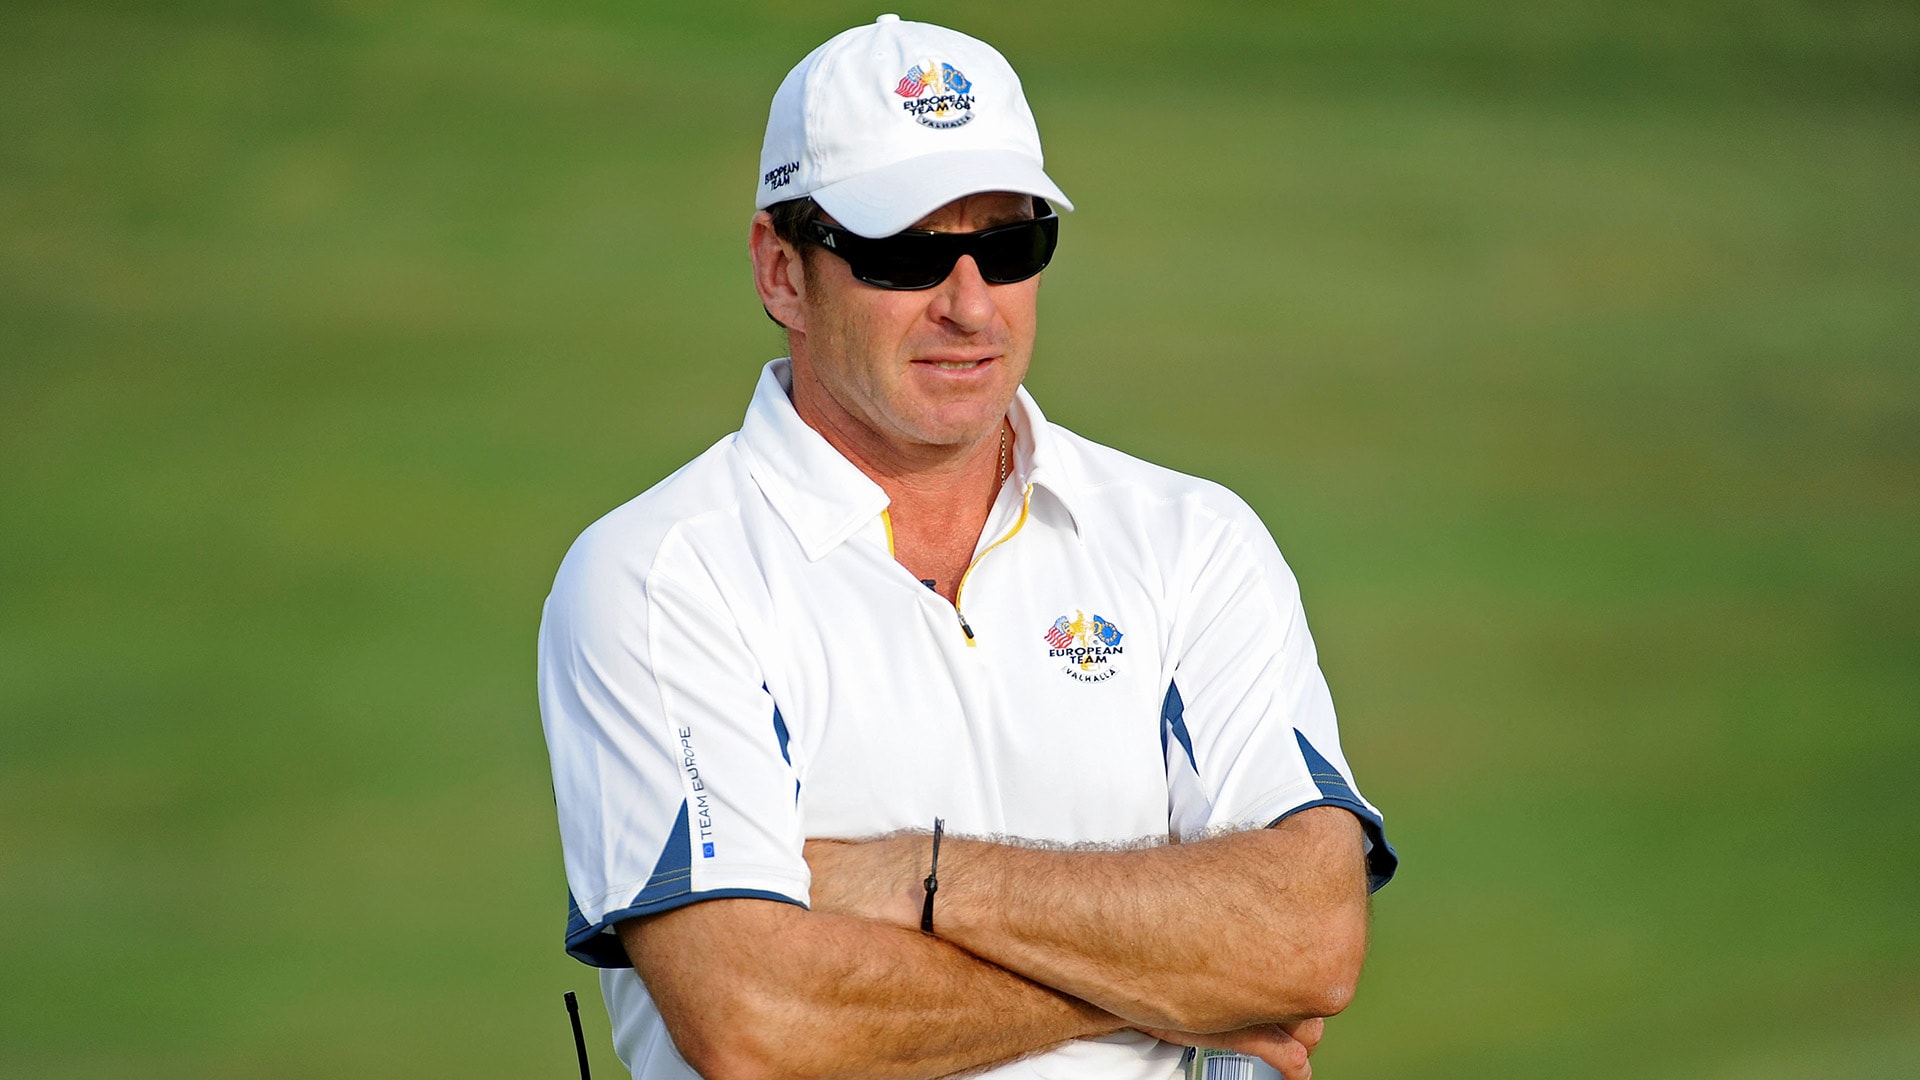 Nick Faldo doesn’t want LIV players on European Ryder Cup team: ‘They’re done’